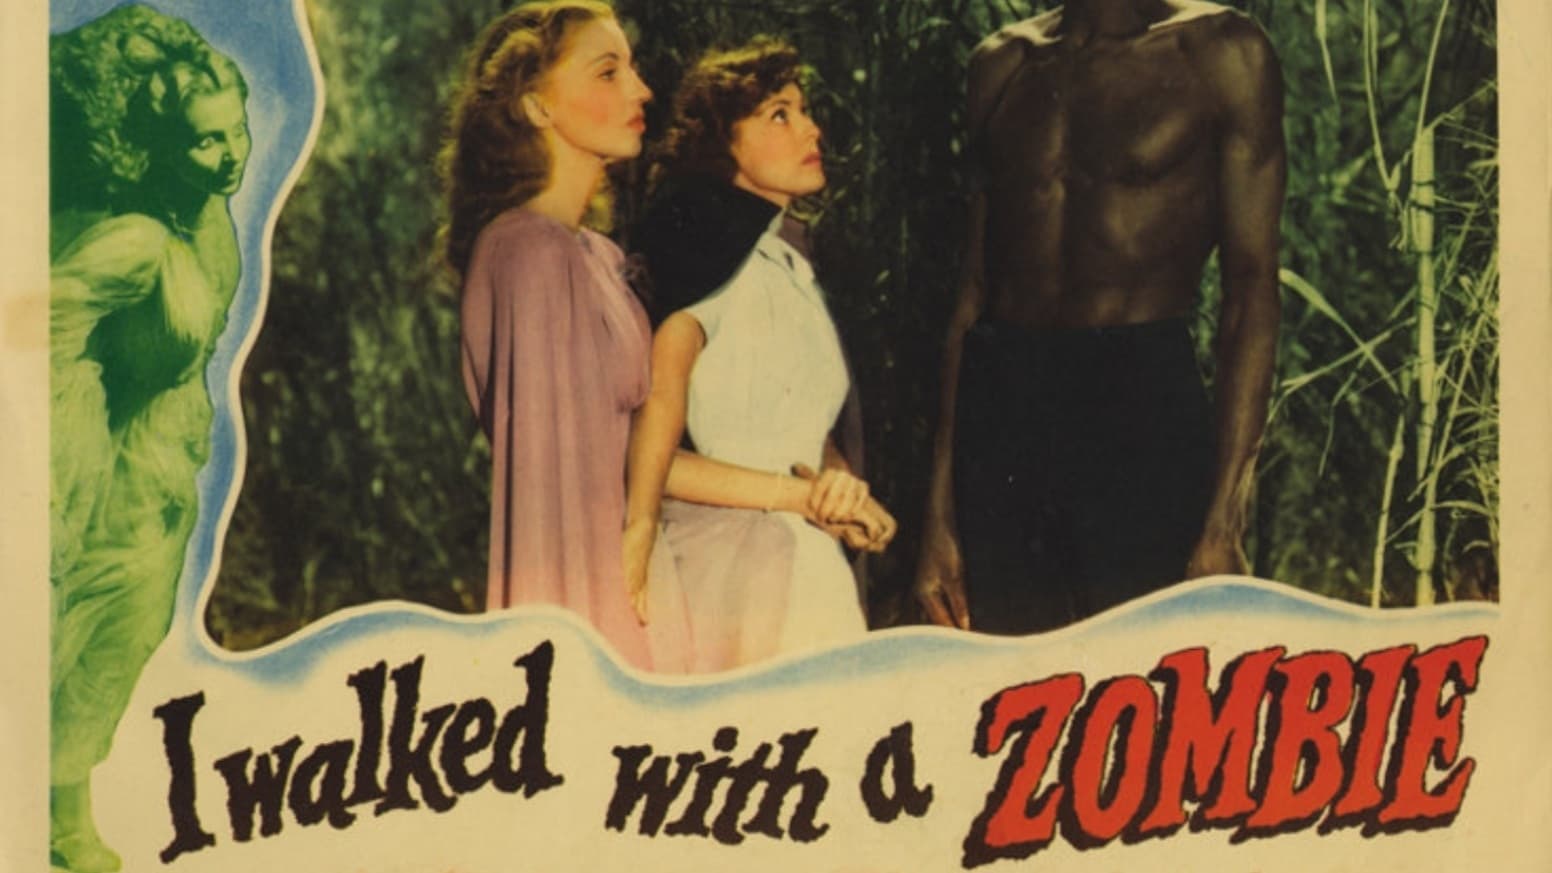 I Walked with a Zombie (1943)